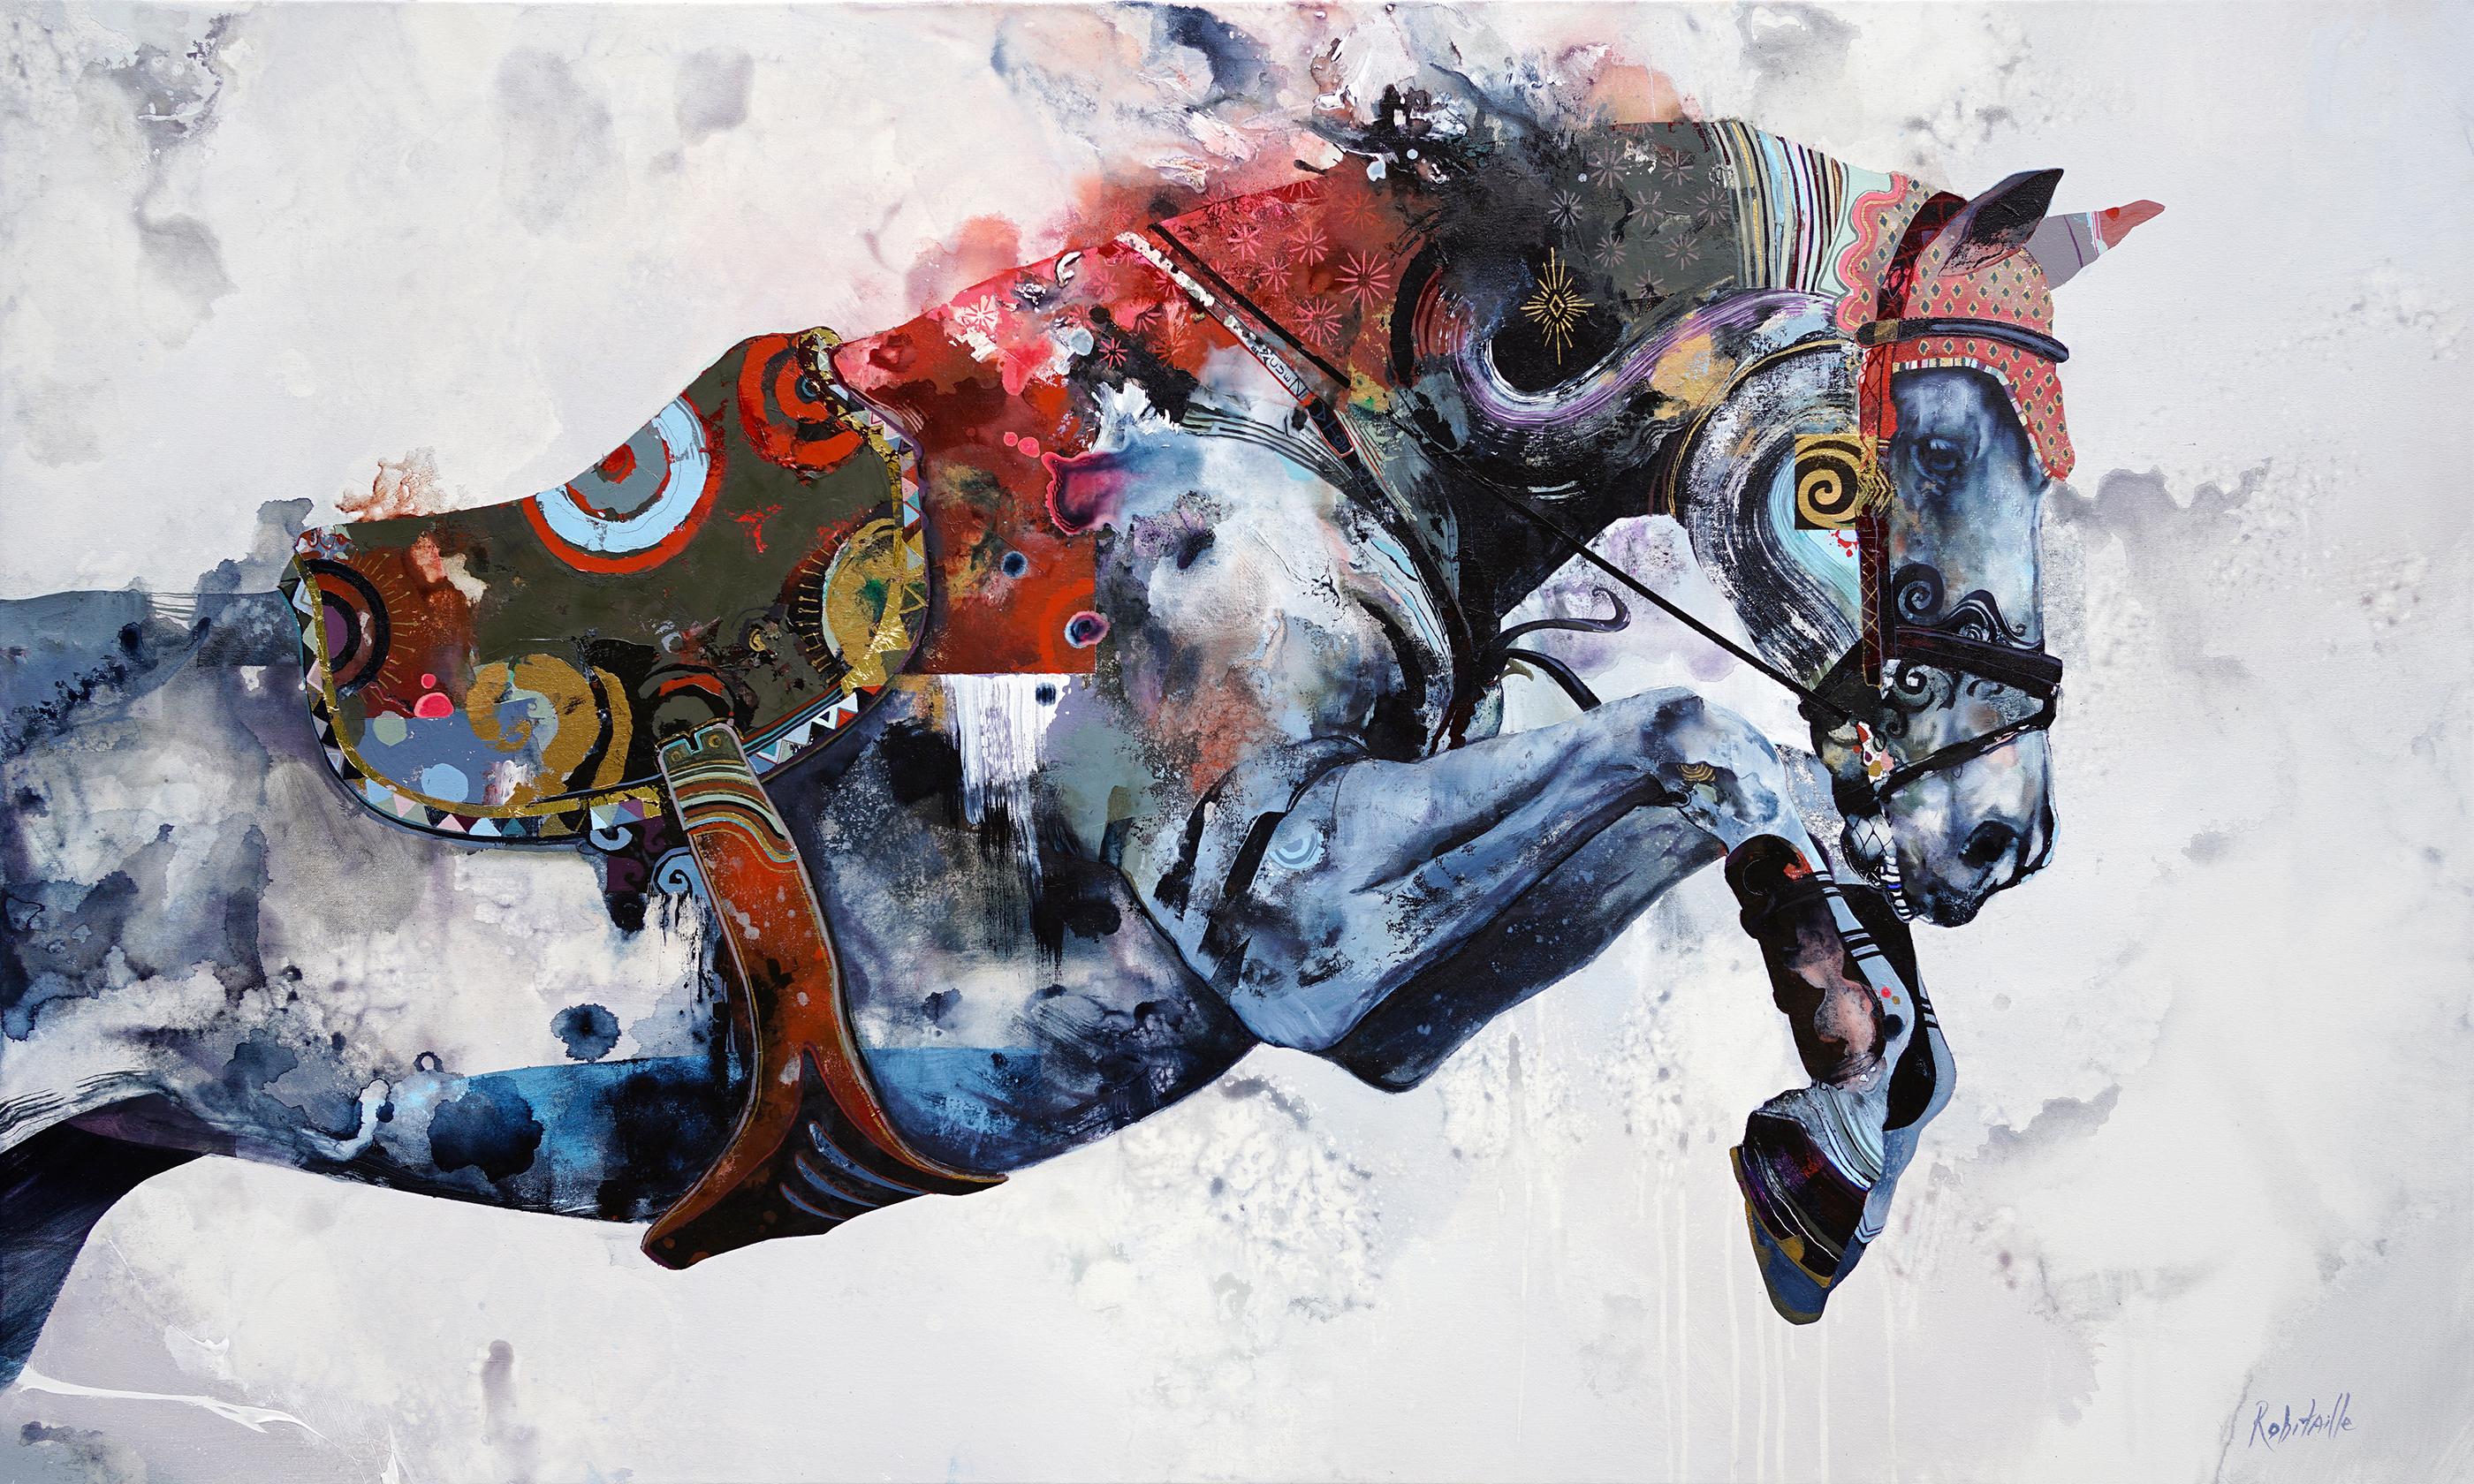 Eric Robitaille Animal Painting - No Return, Colorful Horse oil painting, abstract realism and layered texture